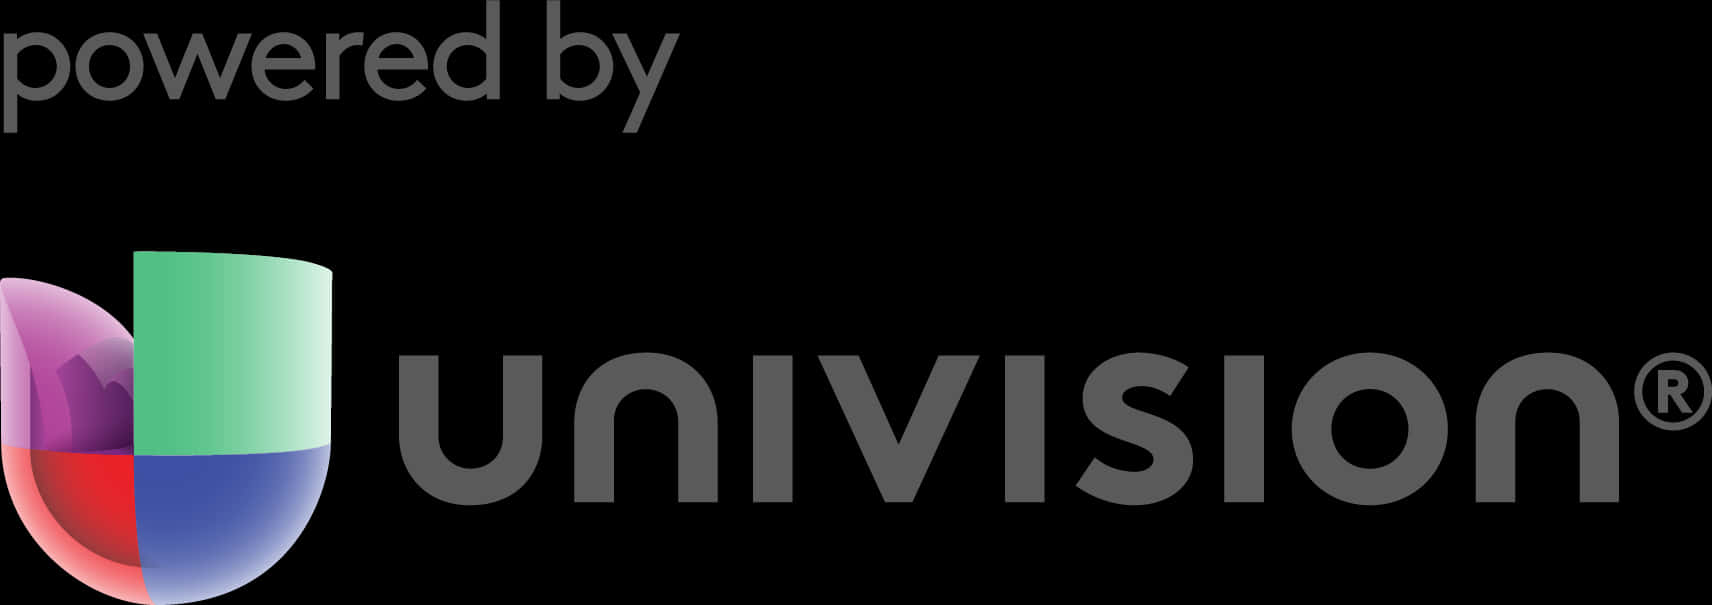 Univision Powered By Logo